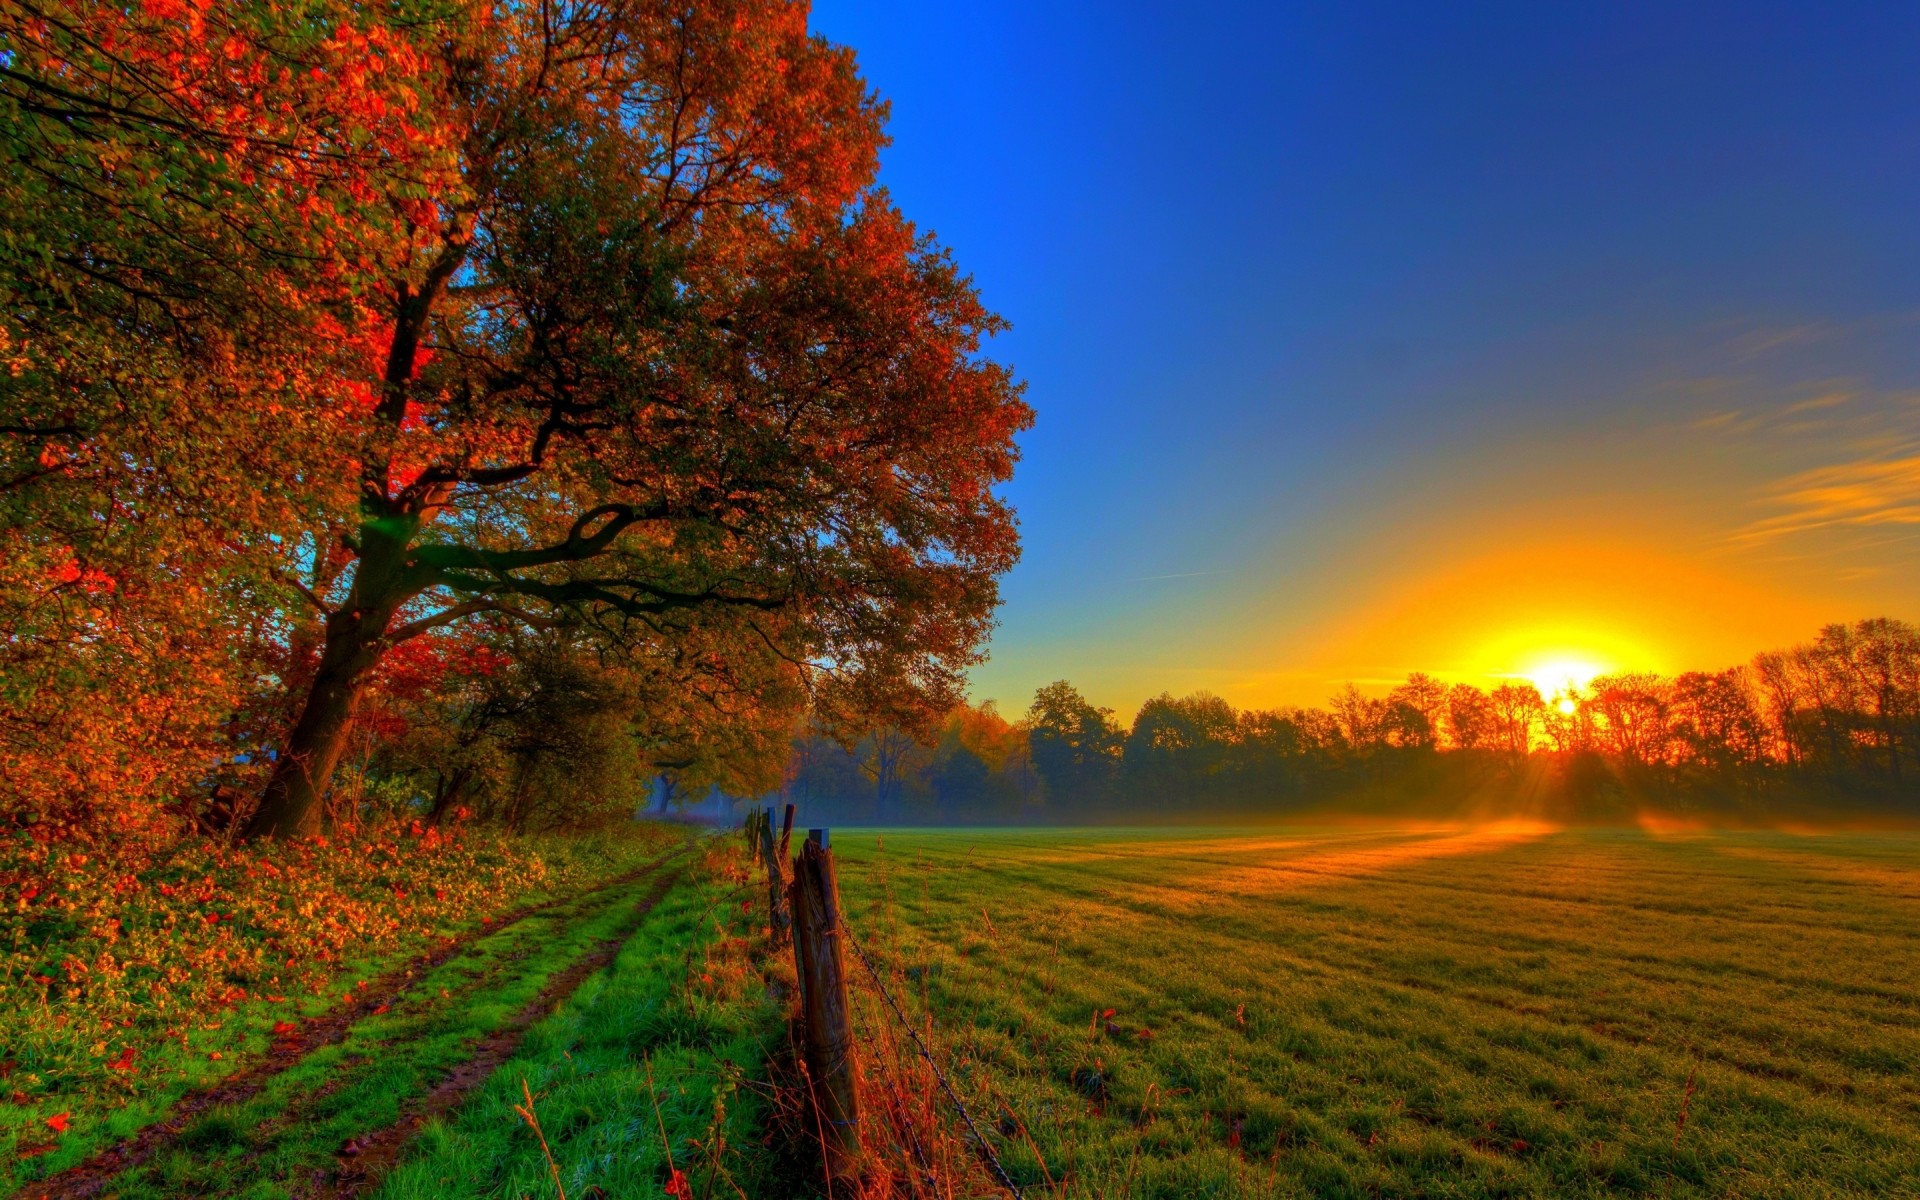 plants dawn fall nature sun sunset landscape outdoors leaf tree fair weather countryside bright rural wood trees sky clouds